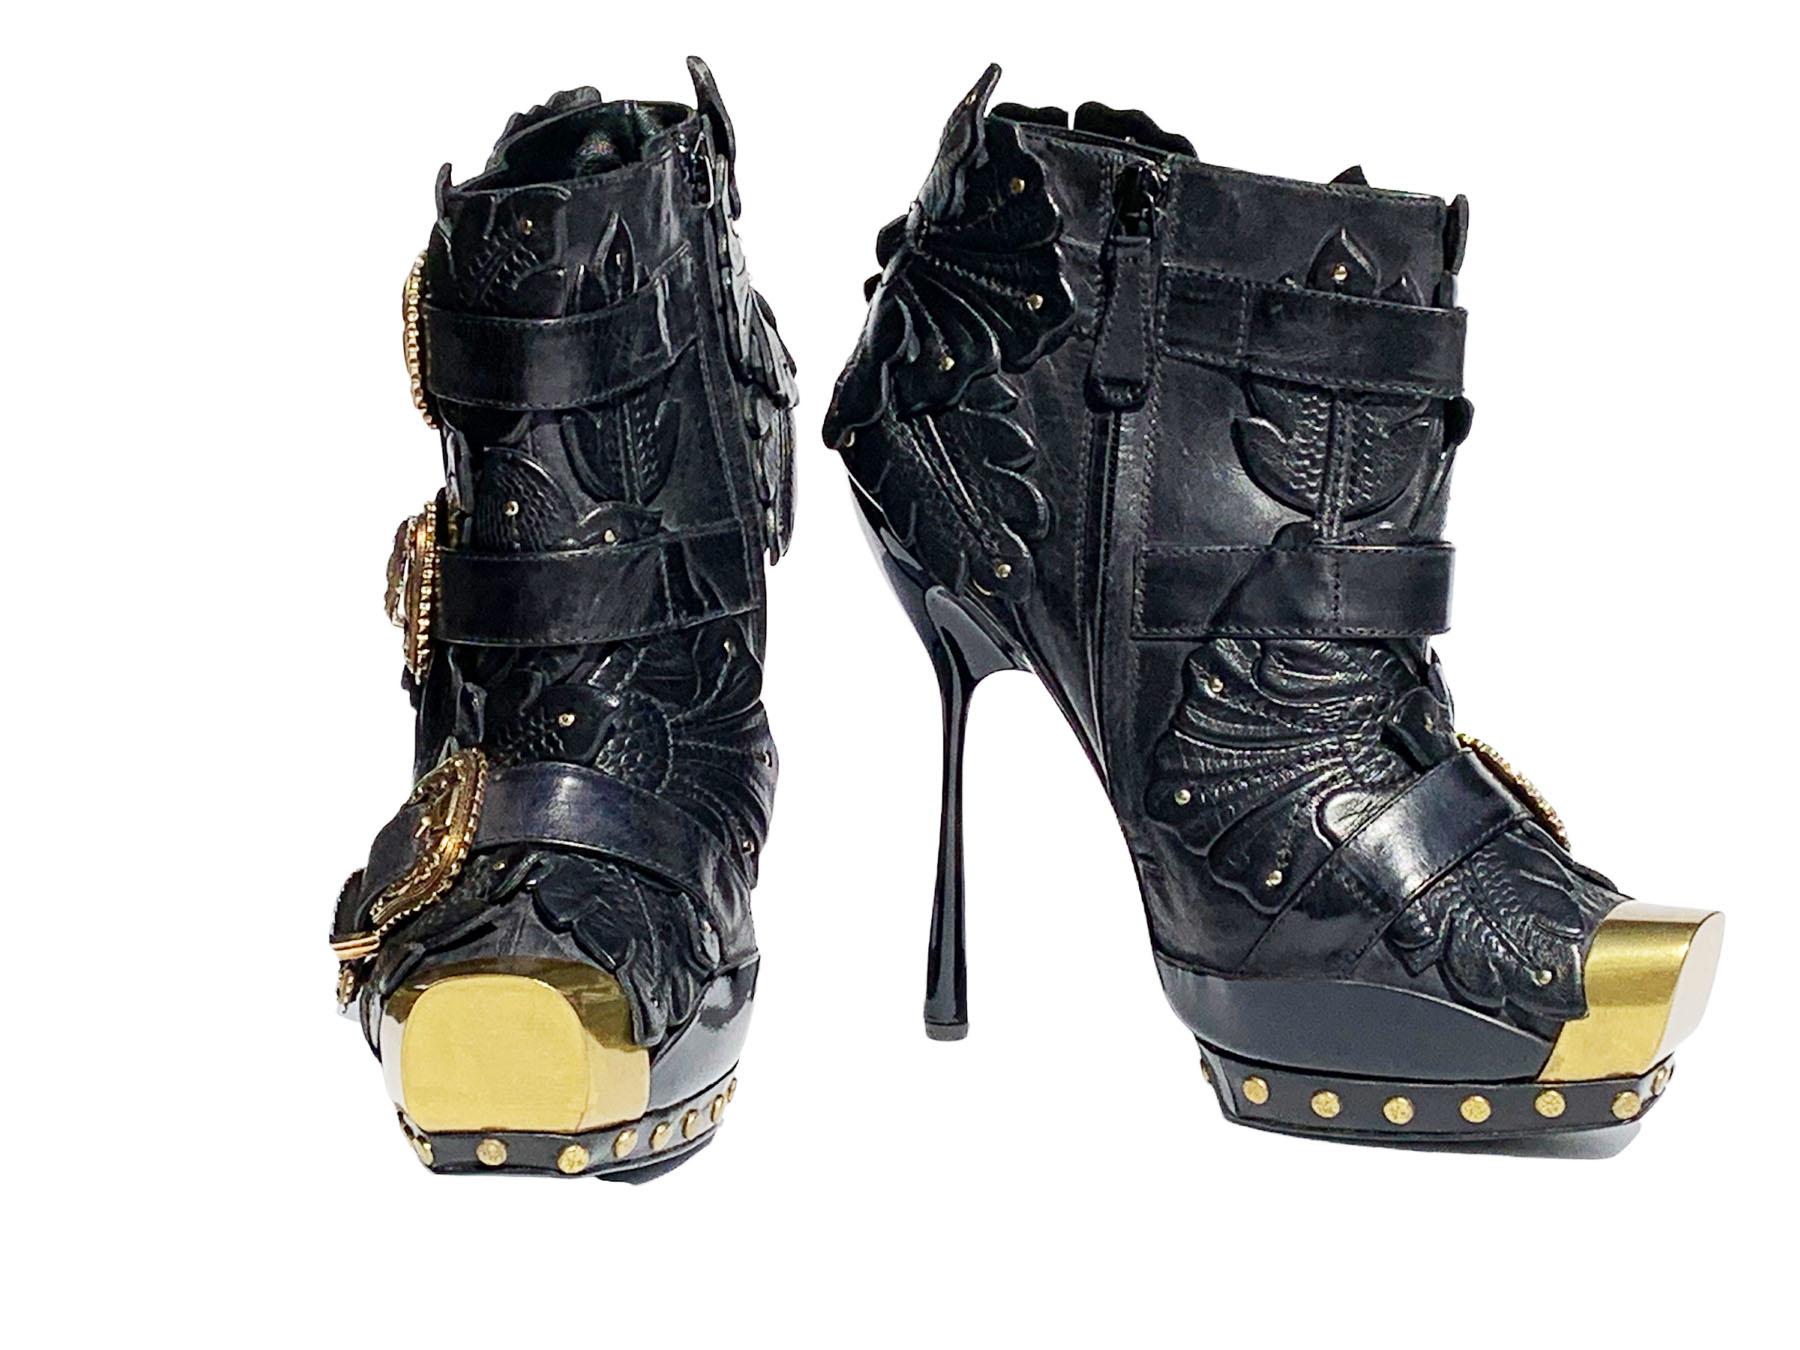 New Alexander McQueen S/S 2011 3D Embellished Studded Ankle Boots 39 US 9 For Sale 1